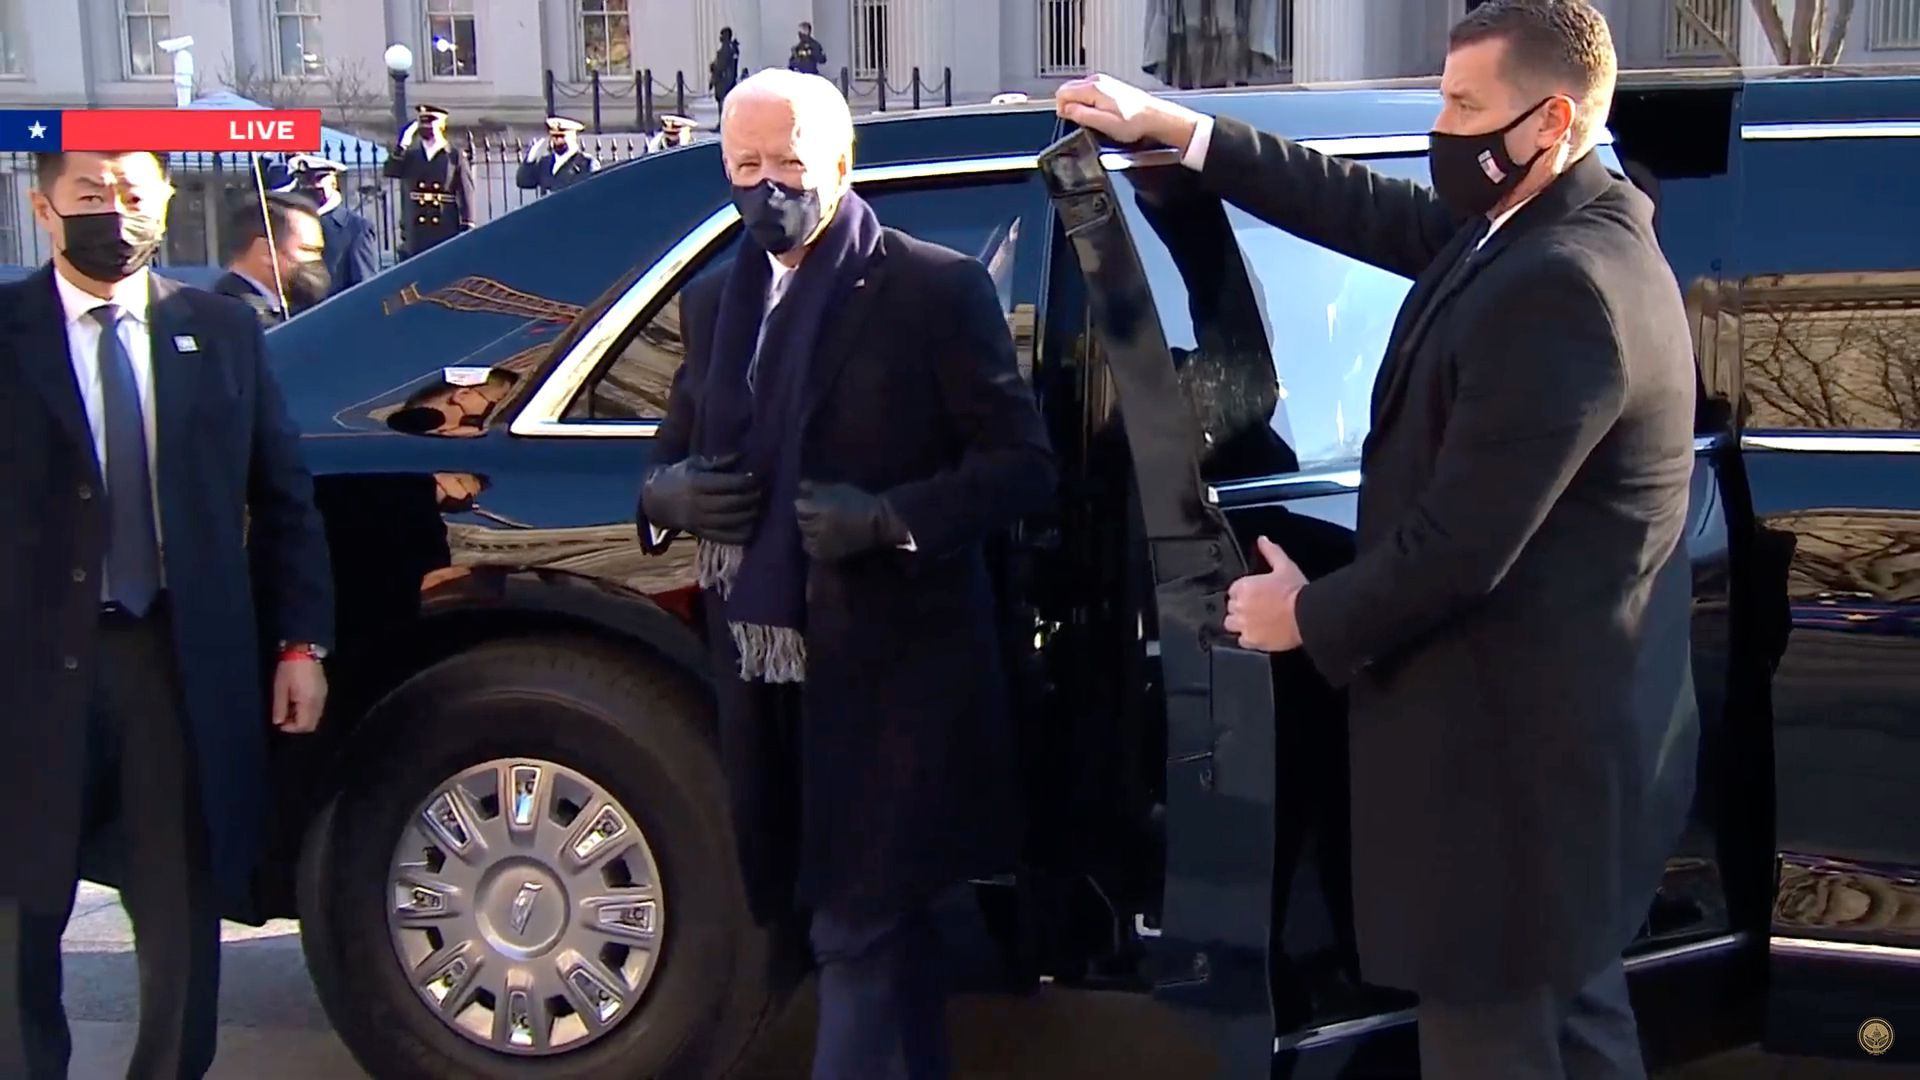 Biden steps out of "The Beast" to join a brief inaugural parade.